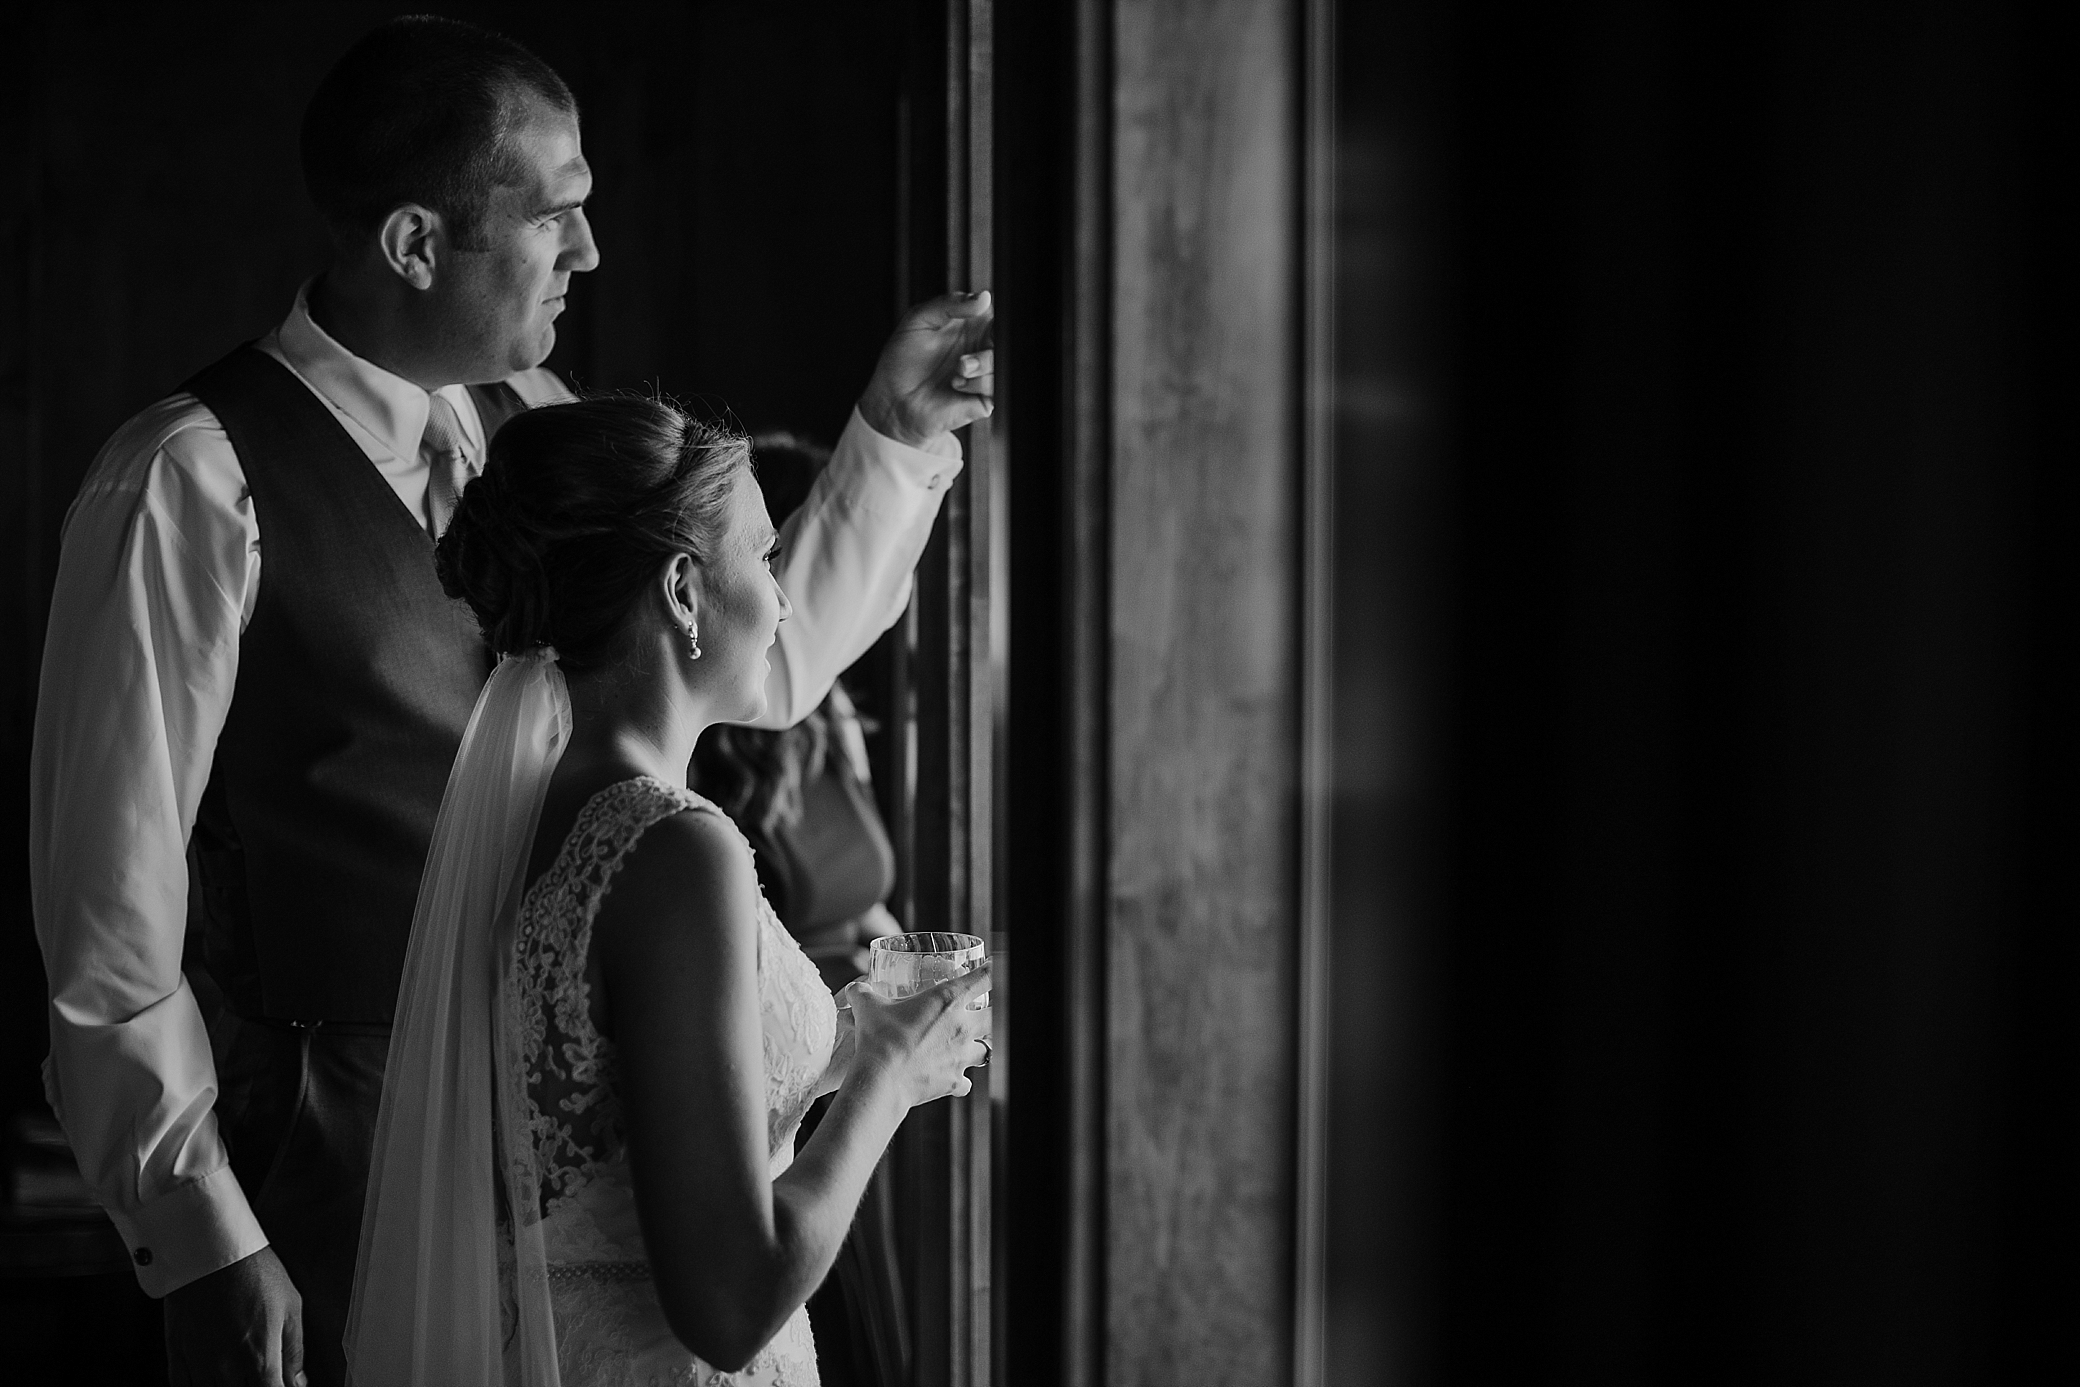 Bride and groom waiting on wedding ceremony to start at the Cattle Barn Wedding Venue | Megan Montalvo Photography 